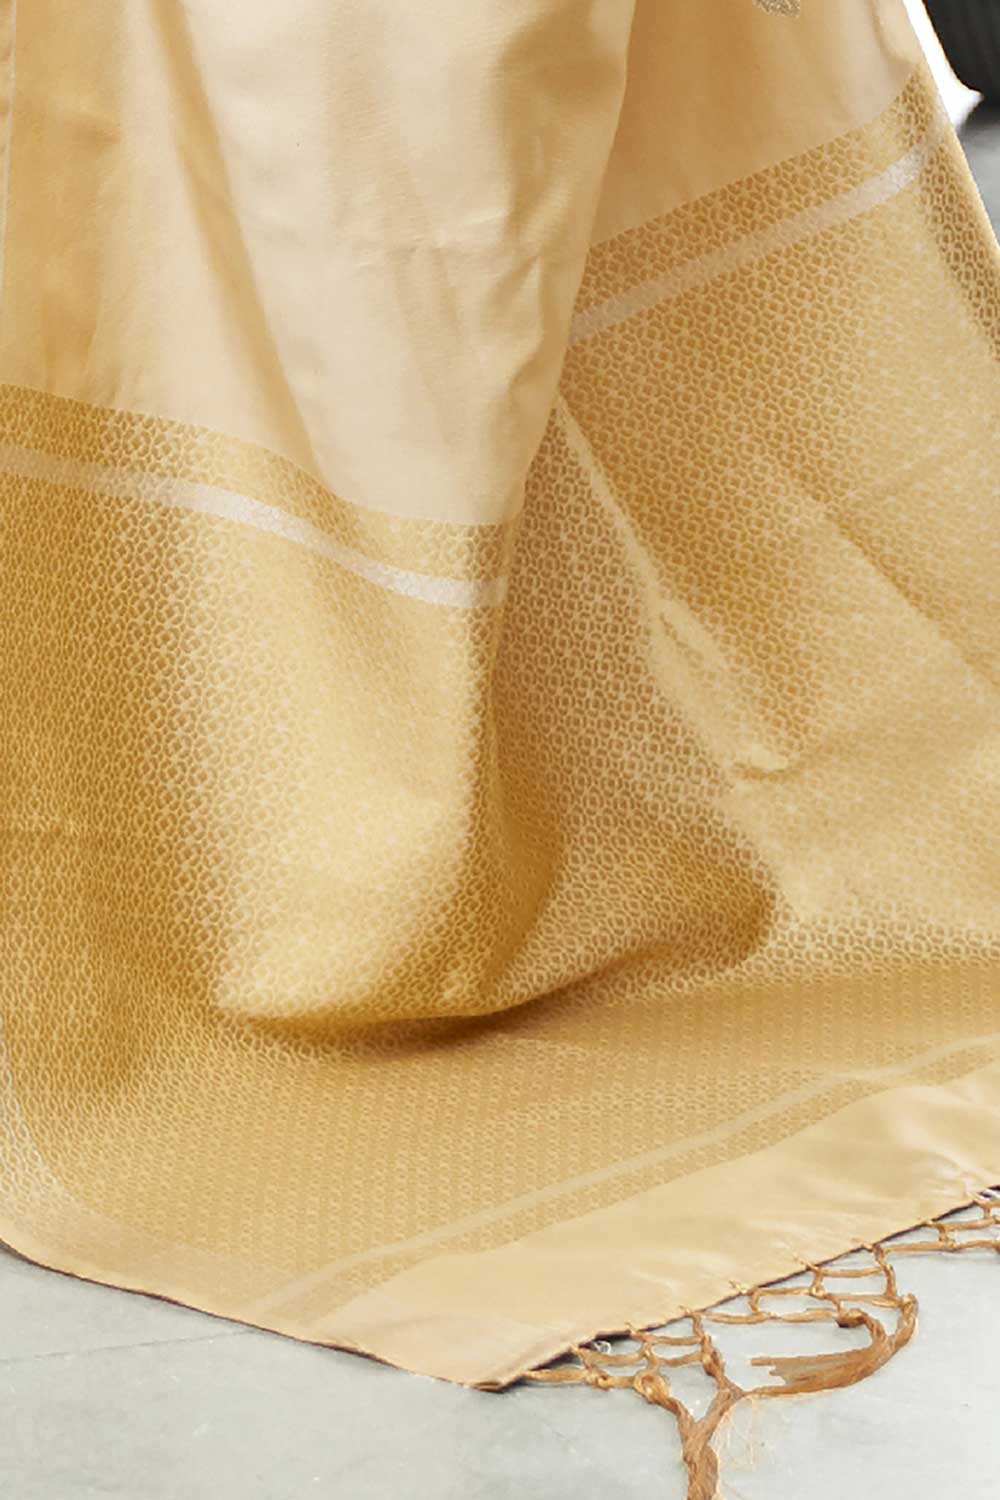 Shop Ilyssa Silk Blend Gold Woven Design Handloom One Minute Saree at best offer at our  Store - One Minute Saree